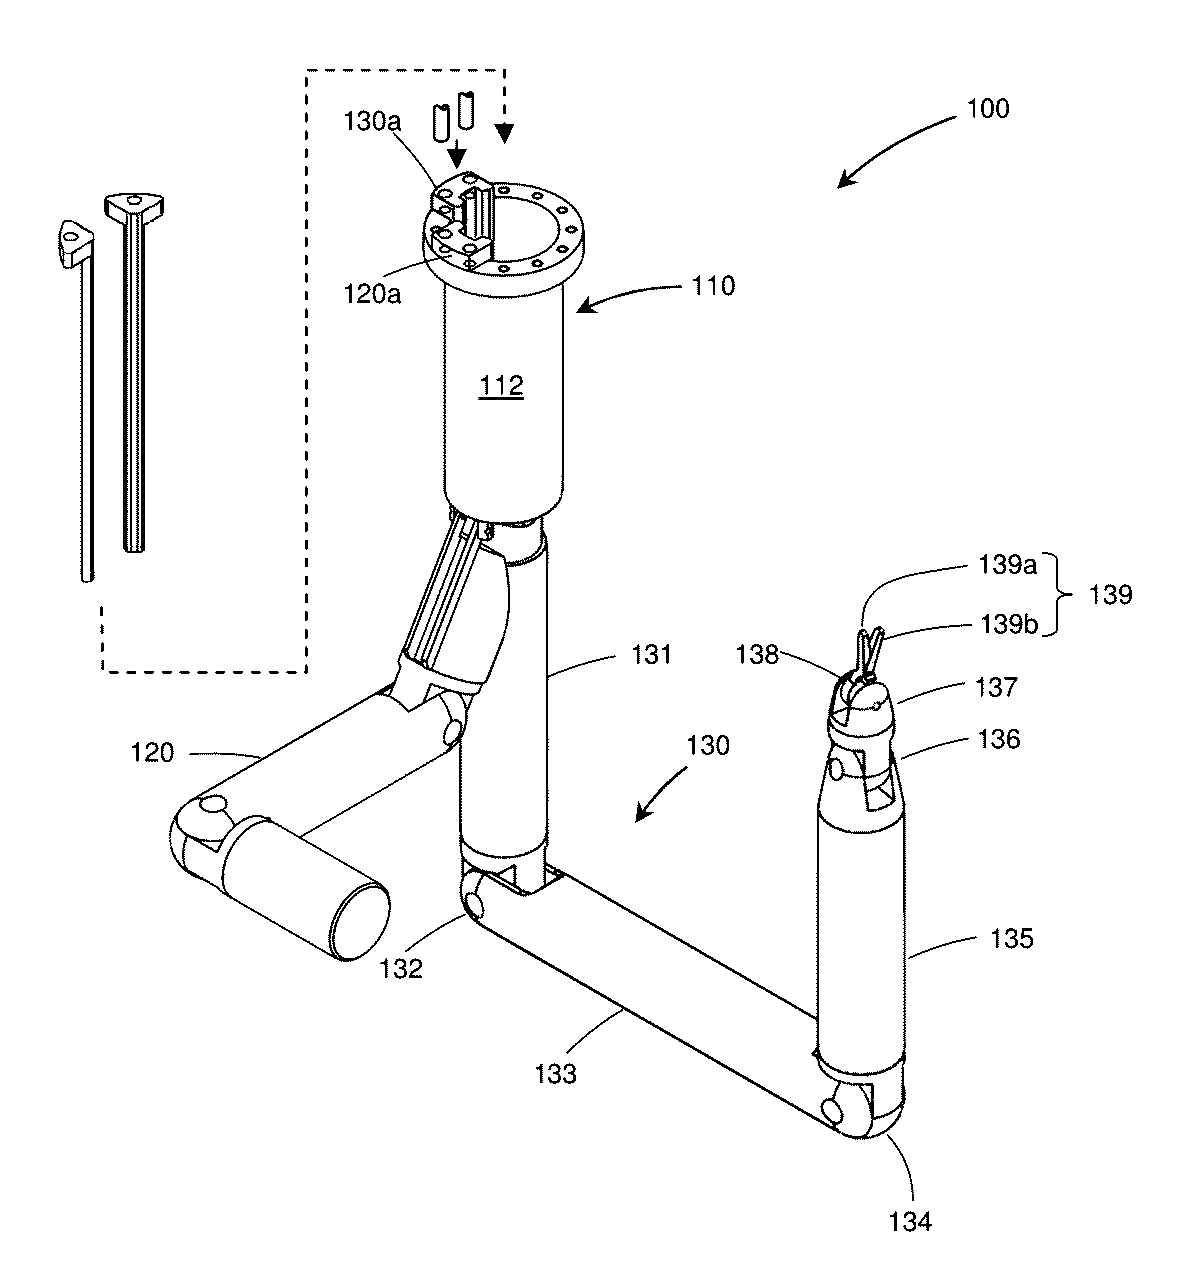 Single access surgical robotic devices and systems, and methods of configuring single access surgical robotic devices and systems